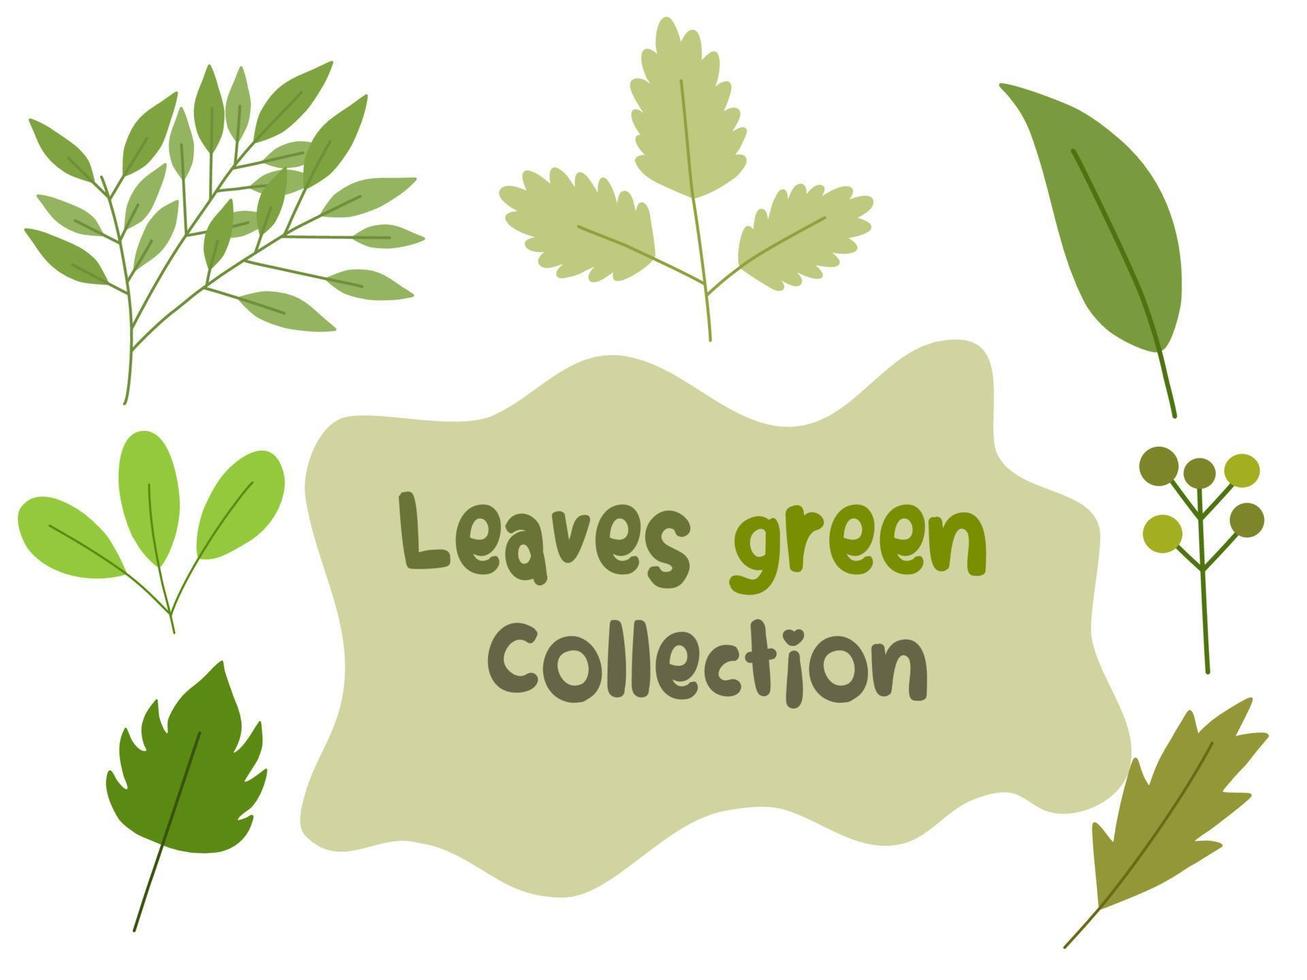 Leaves green Collection vector